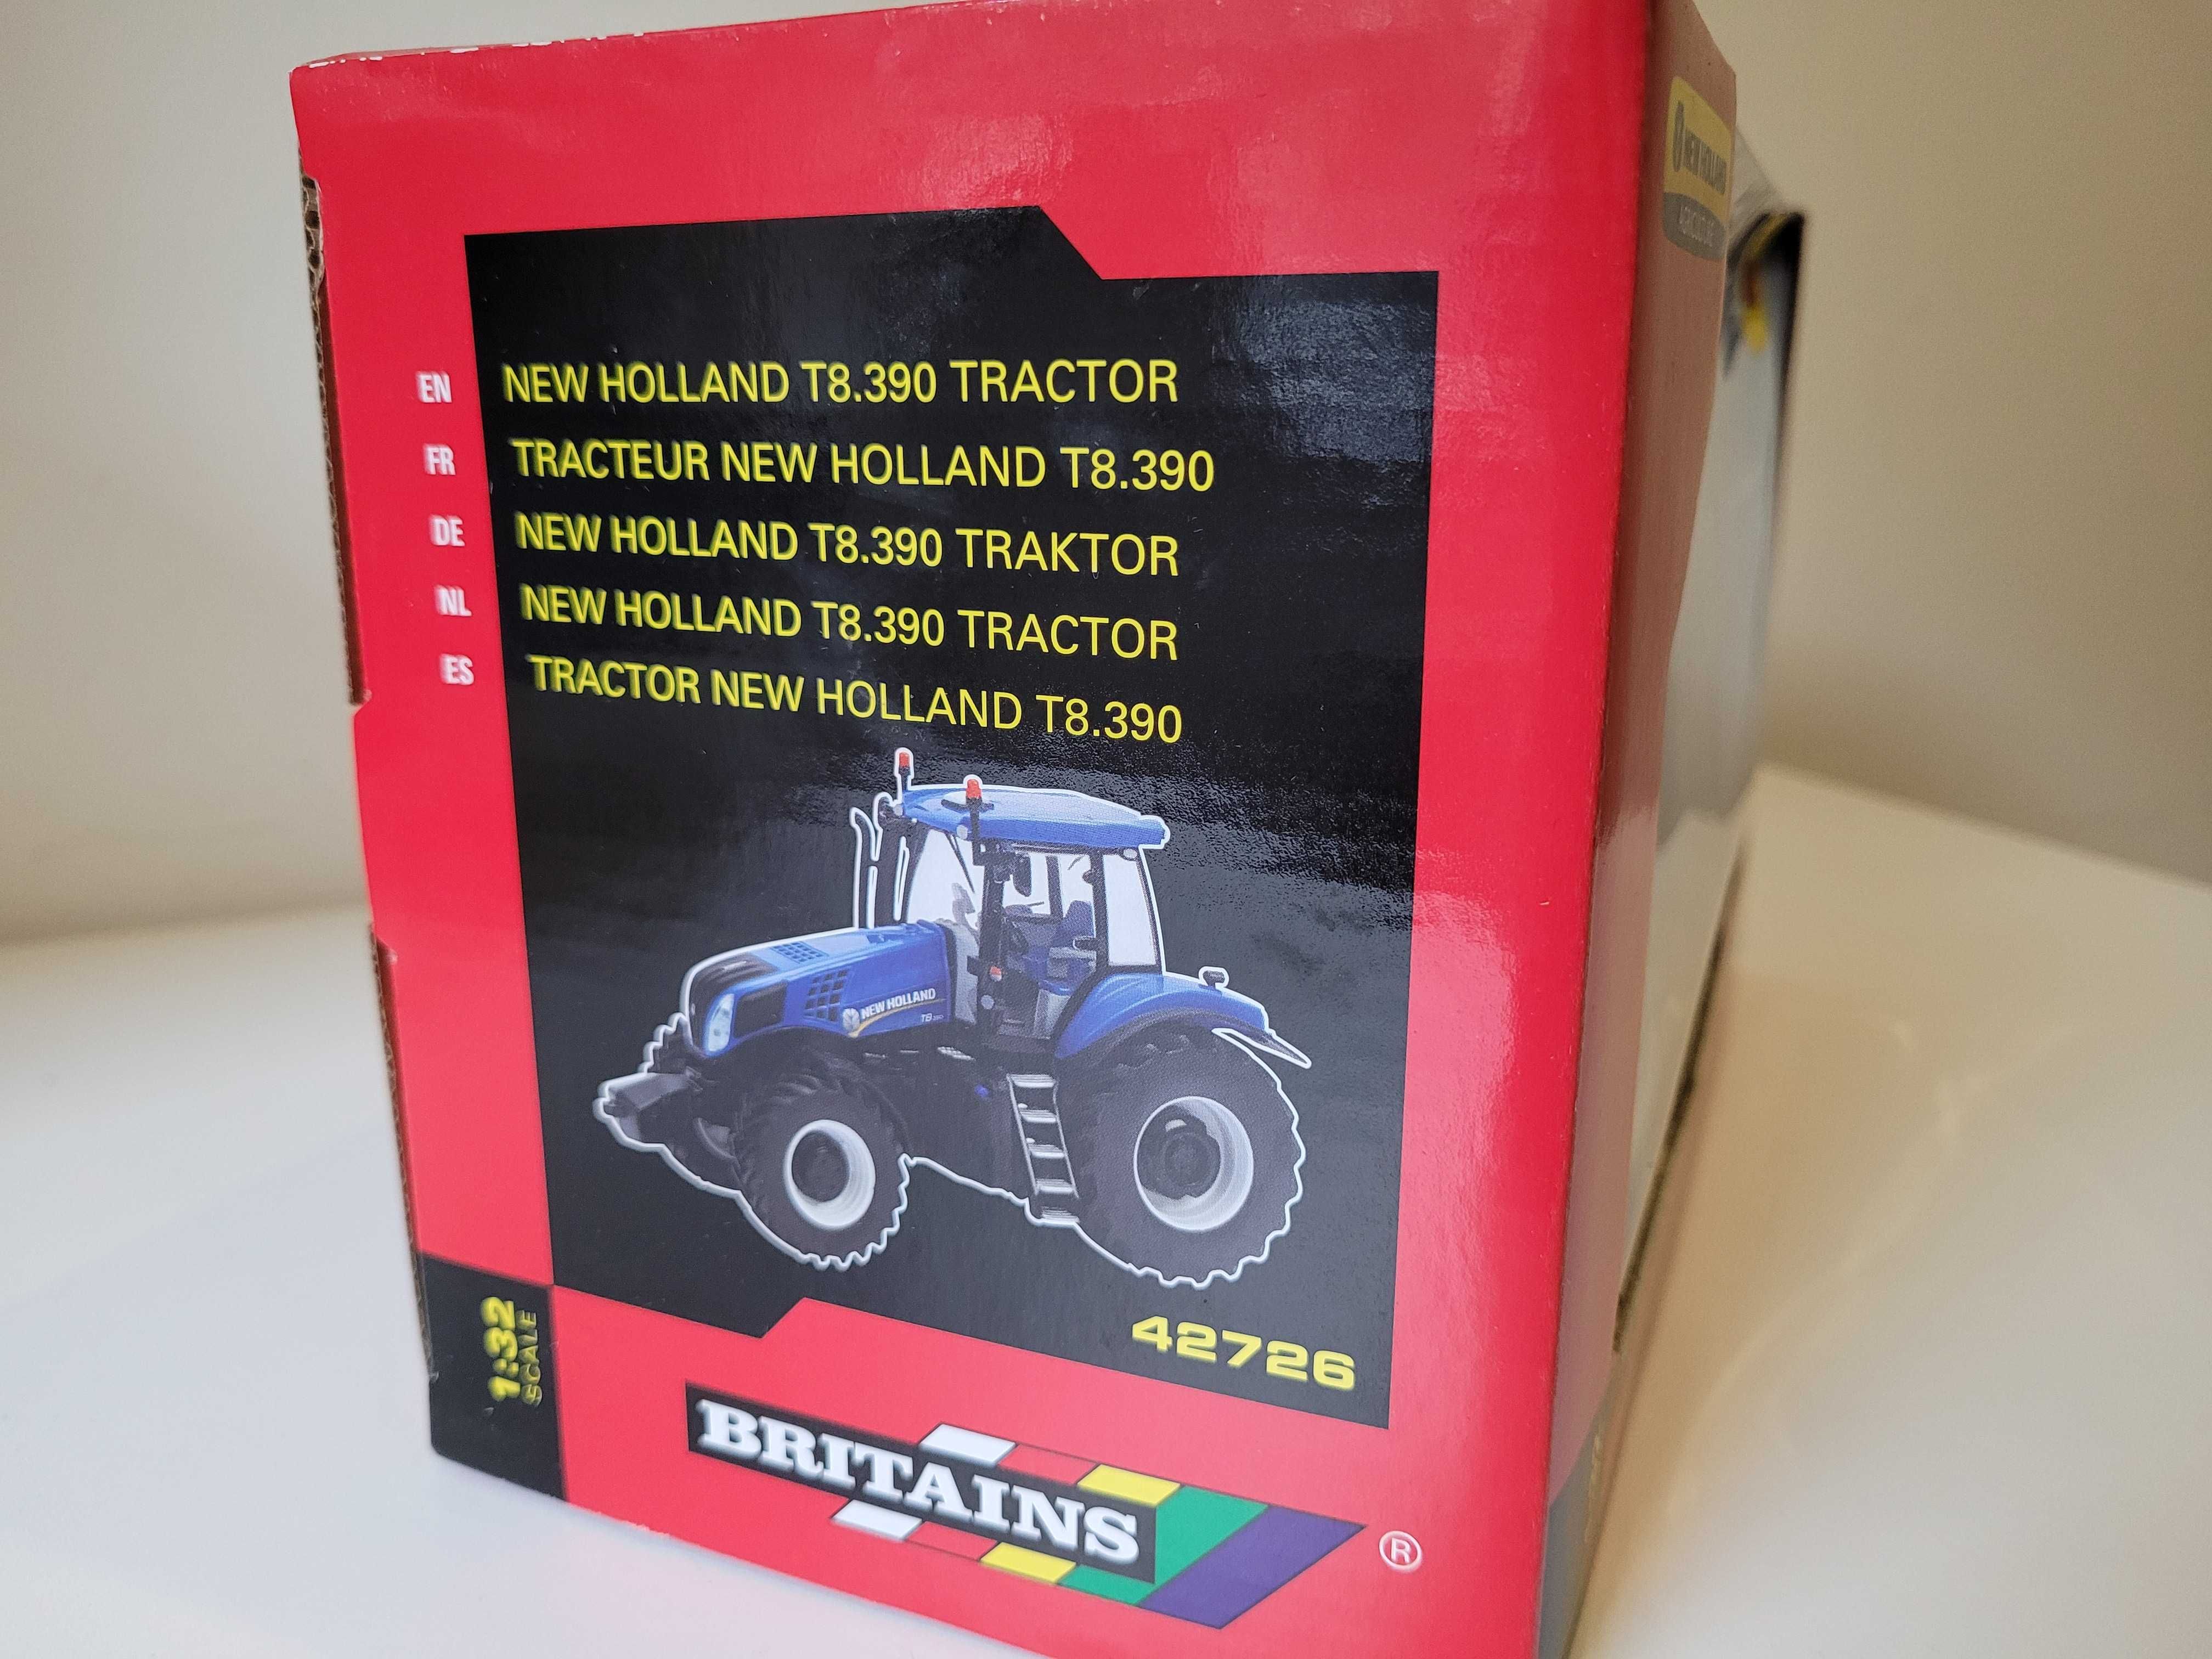 BRITAINS New Holland T8.390 Tractor model w skali 1:32